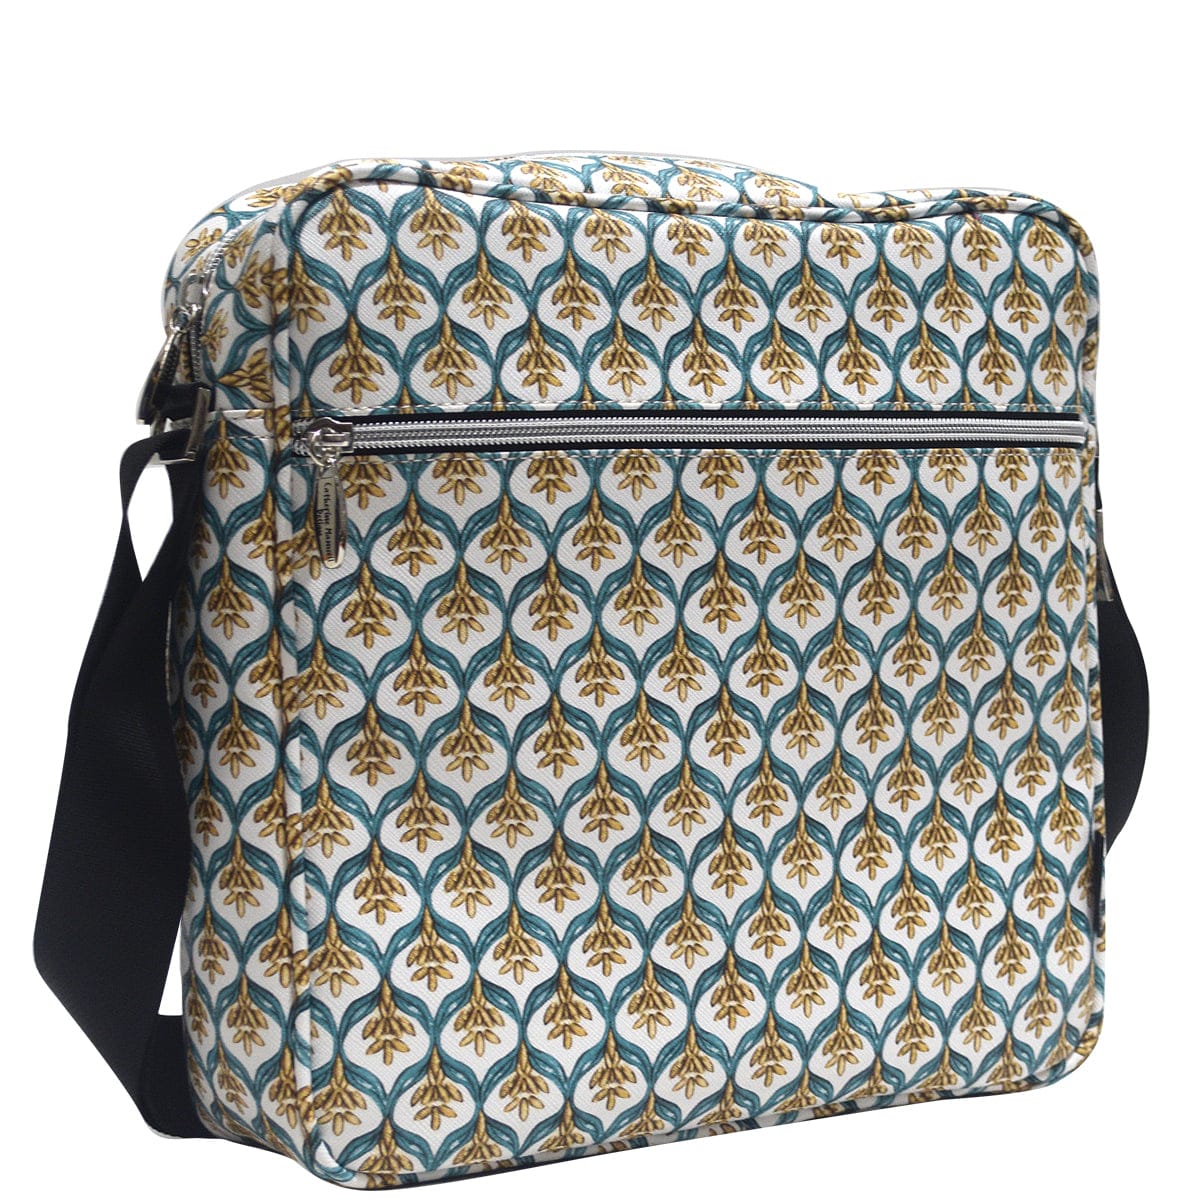 Taller Argyle Bag - French Chateau Blue Sand - 50% off